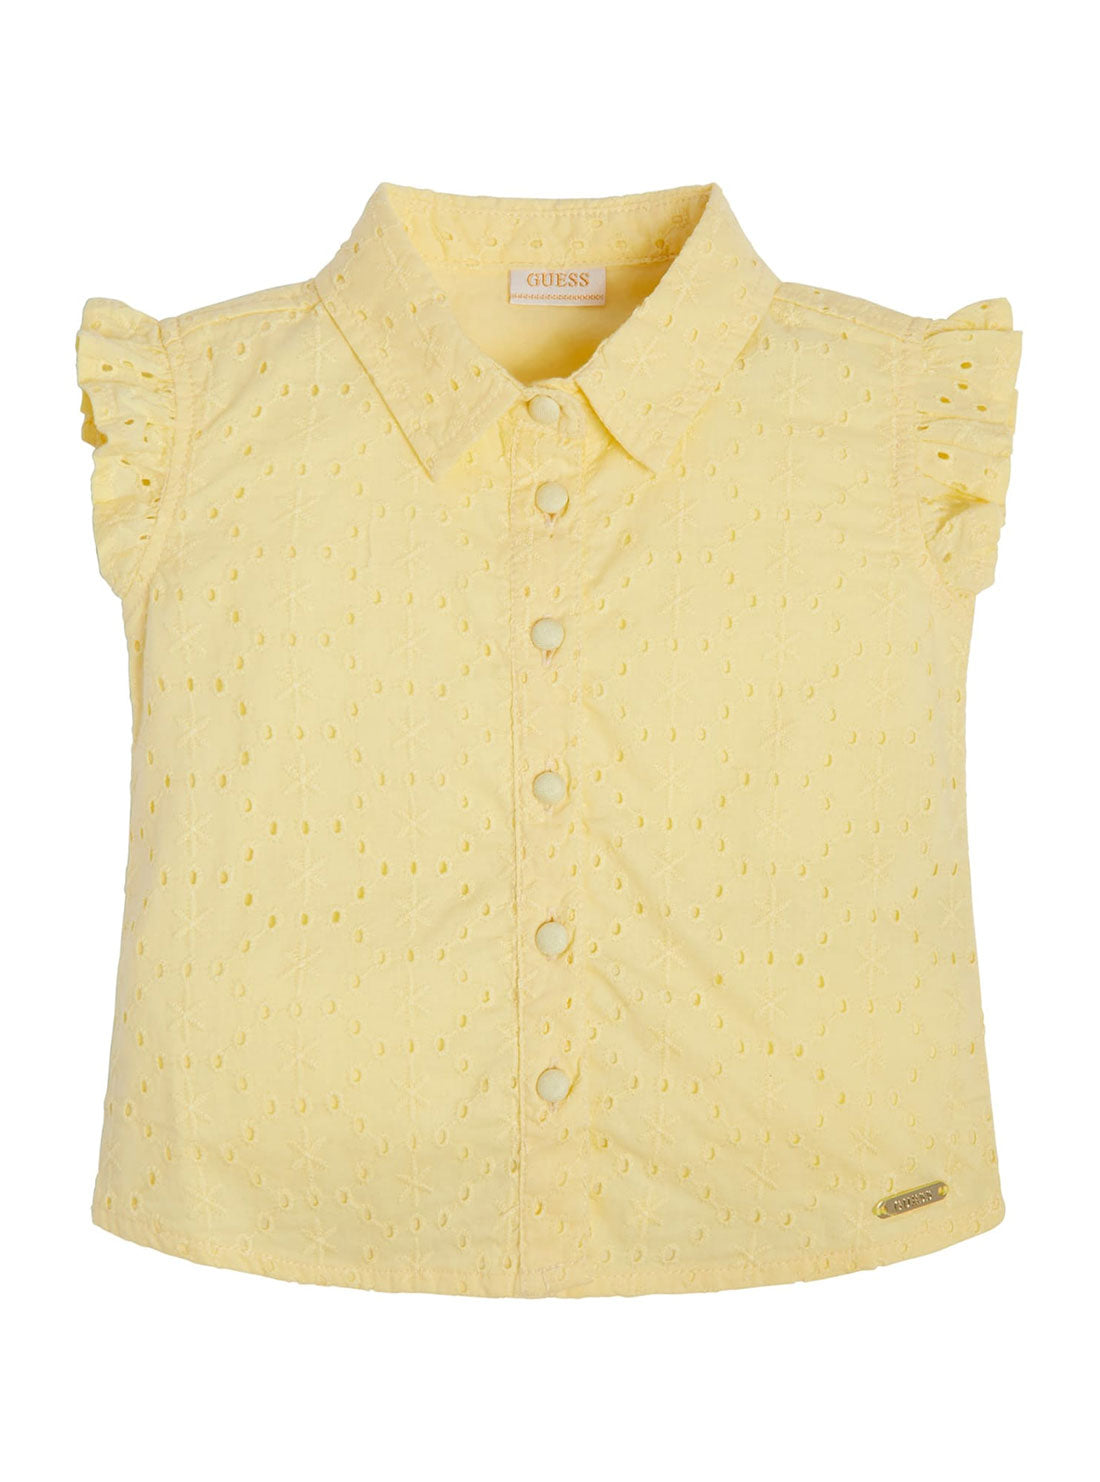 Yellow Sangallo Embroidered Top | GUESS Kids | Front view